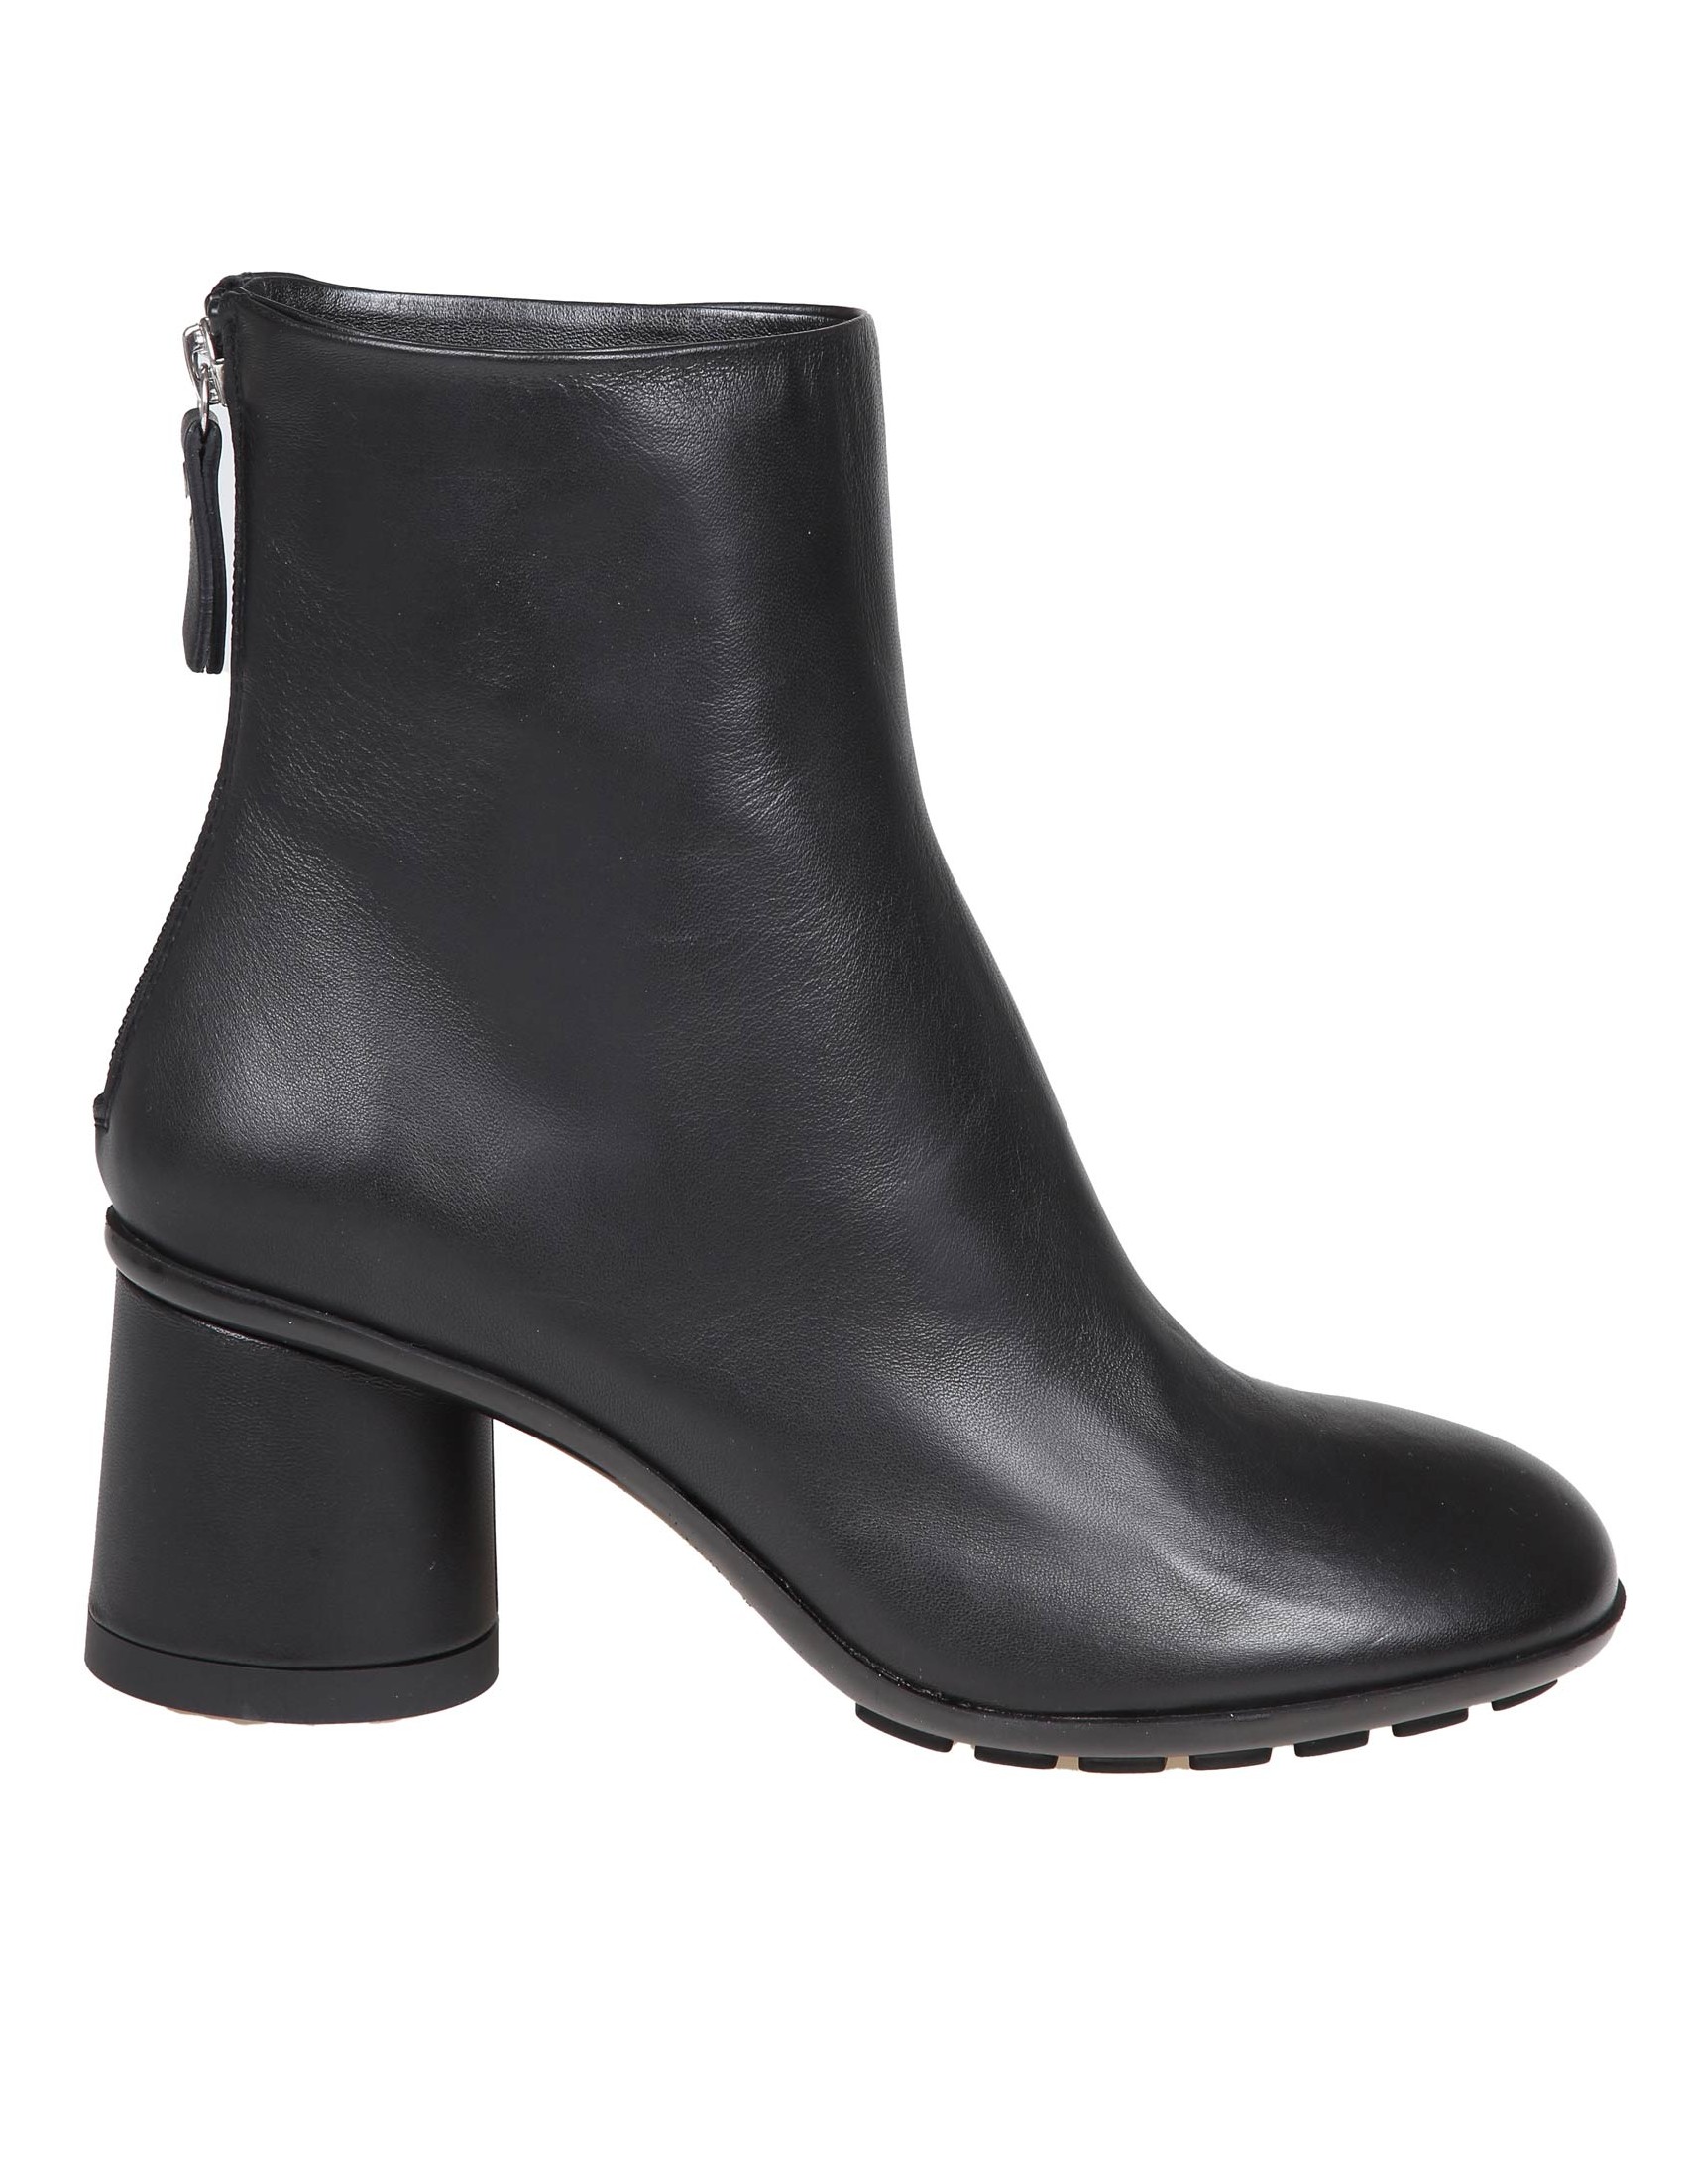 AGL CURVY ANKLE BOOTS IN BLACK COLOR LEATHER